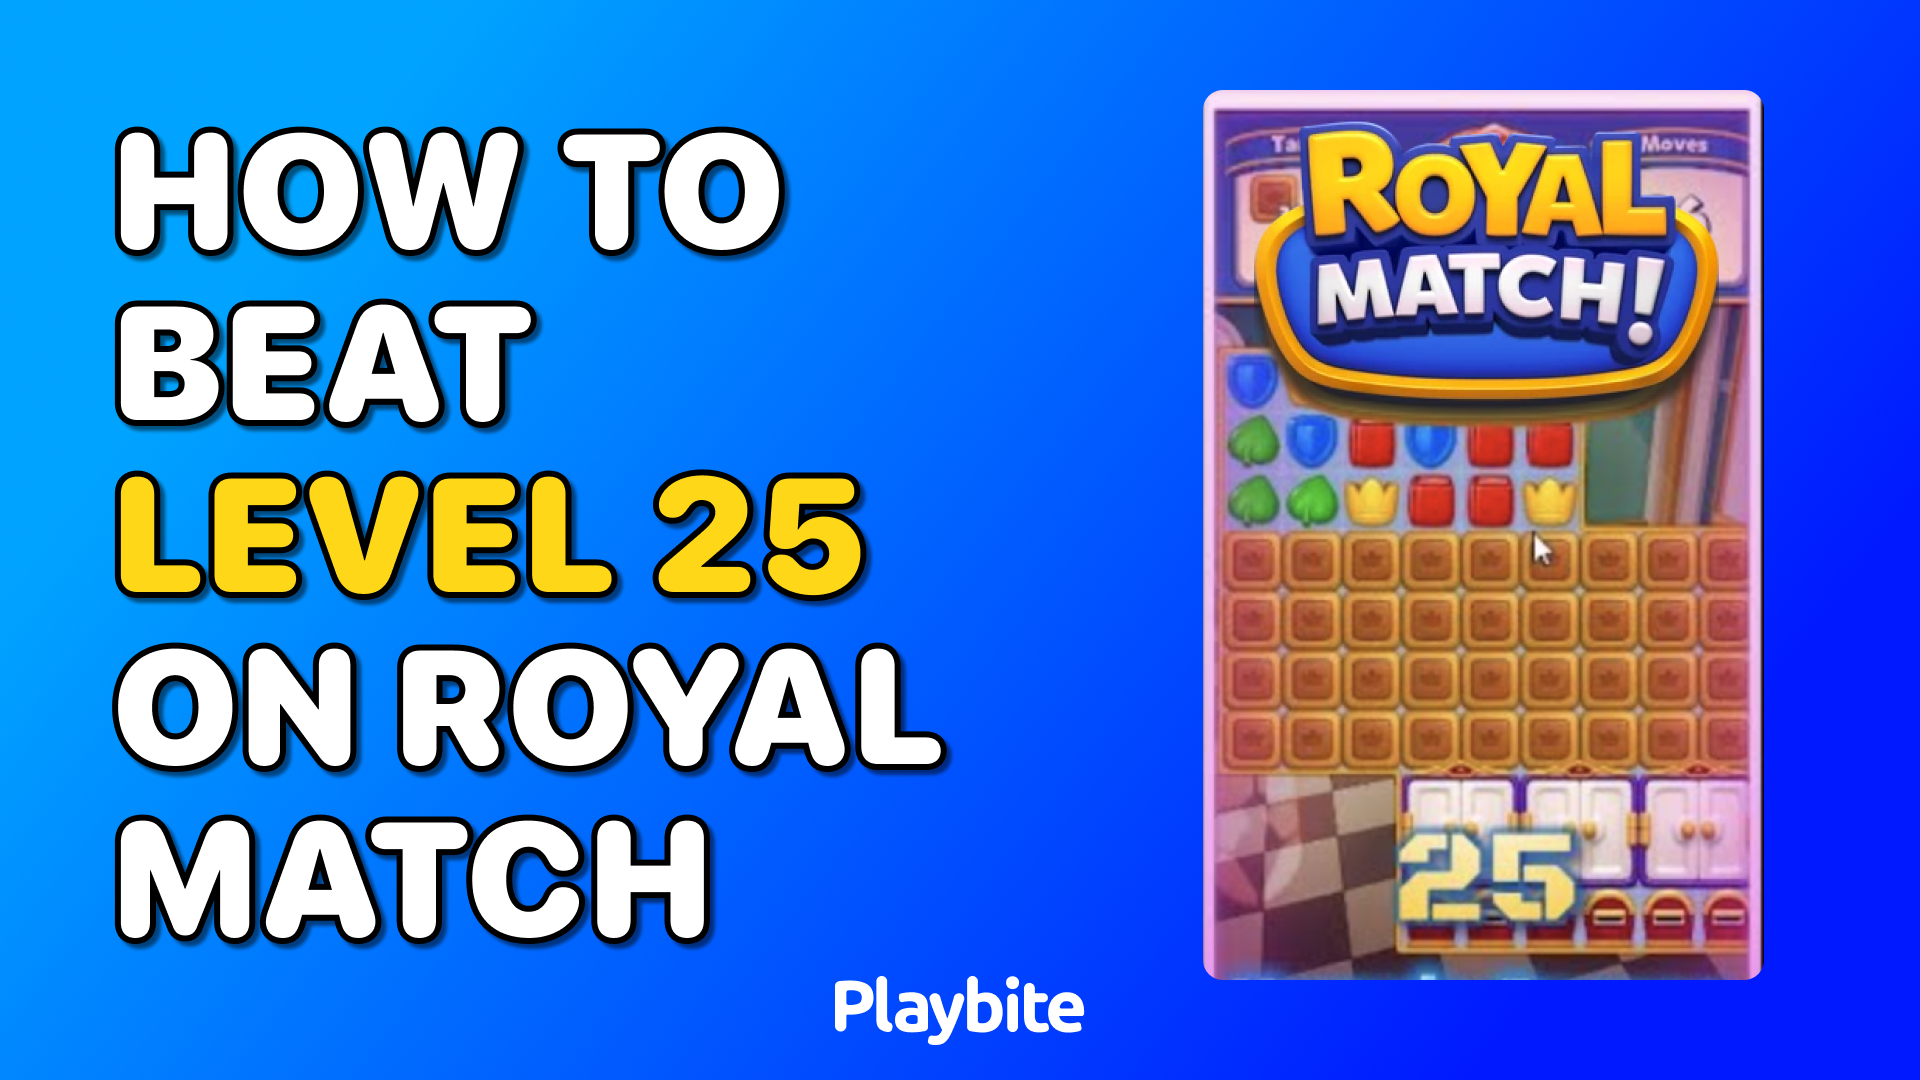 How to Beat Level 25 on Royal Match